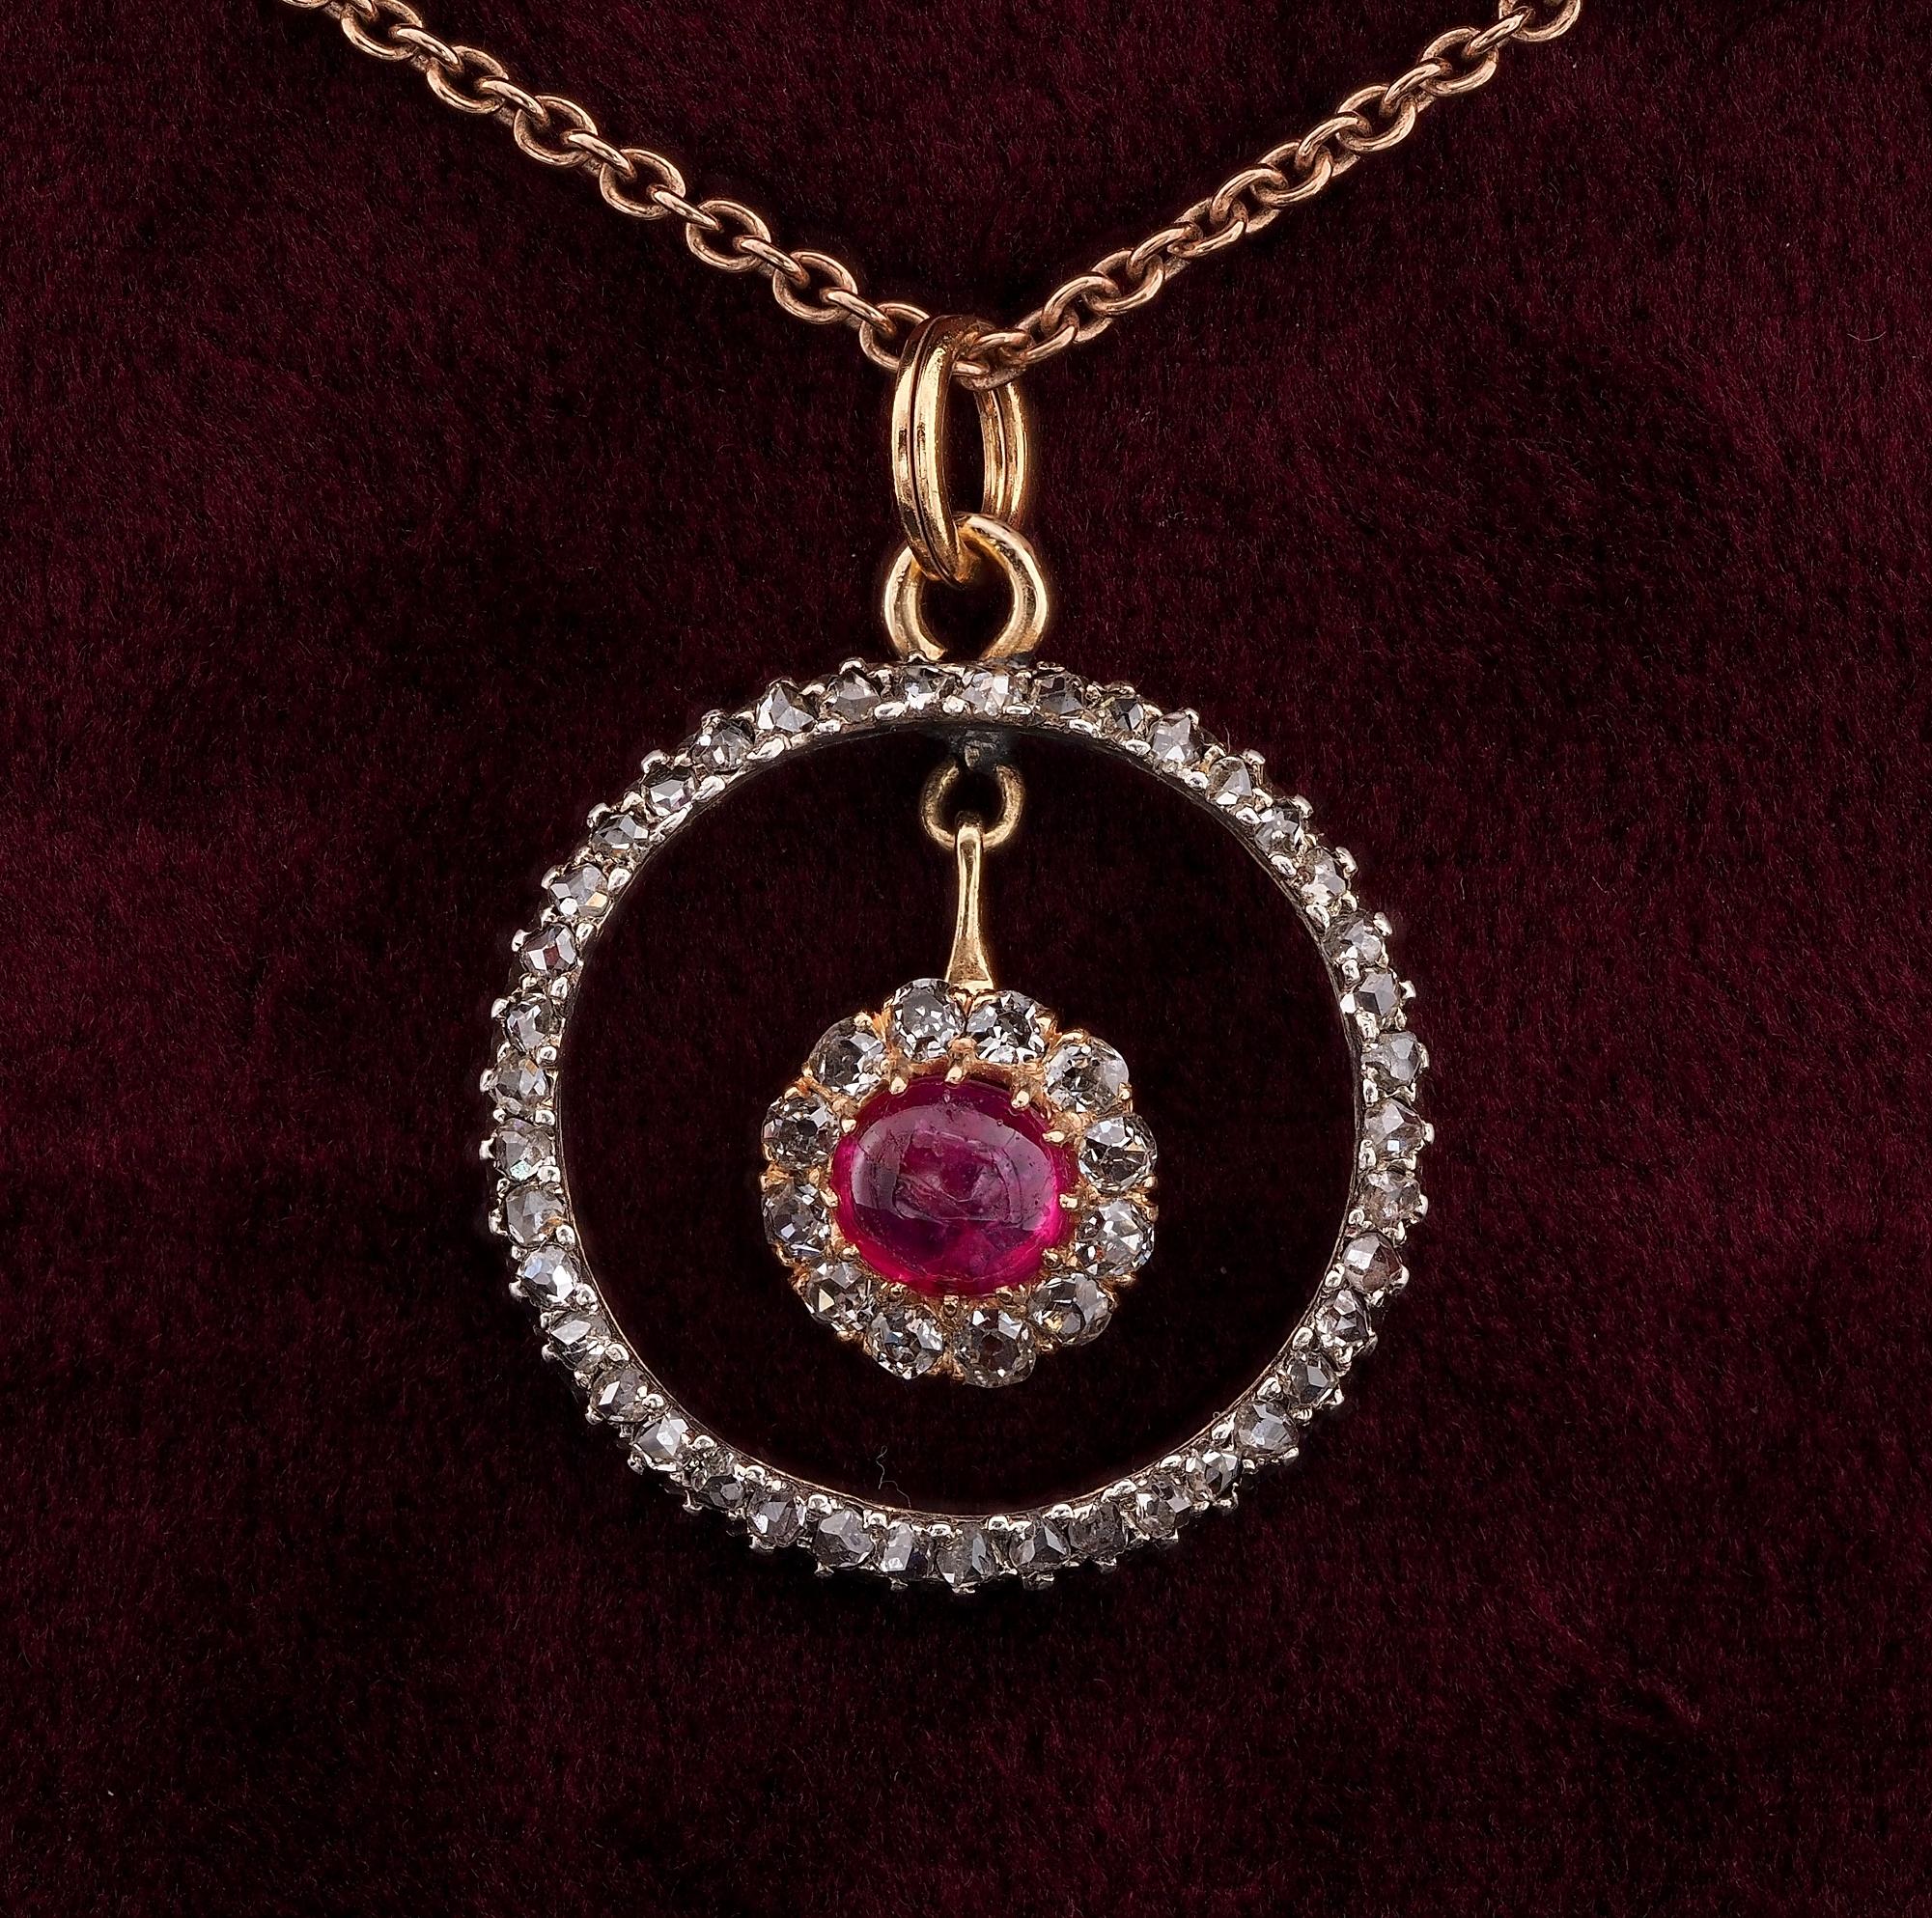 Love Circle
This gorgeous eternity pendant is Victorian period, 1880 ca
Hand crafted of solid 18 KT with silver portions
Circle stands for eternity or eternal love, Ruby symbolises passion, simple yet romantic and effective work of the era
Circle is